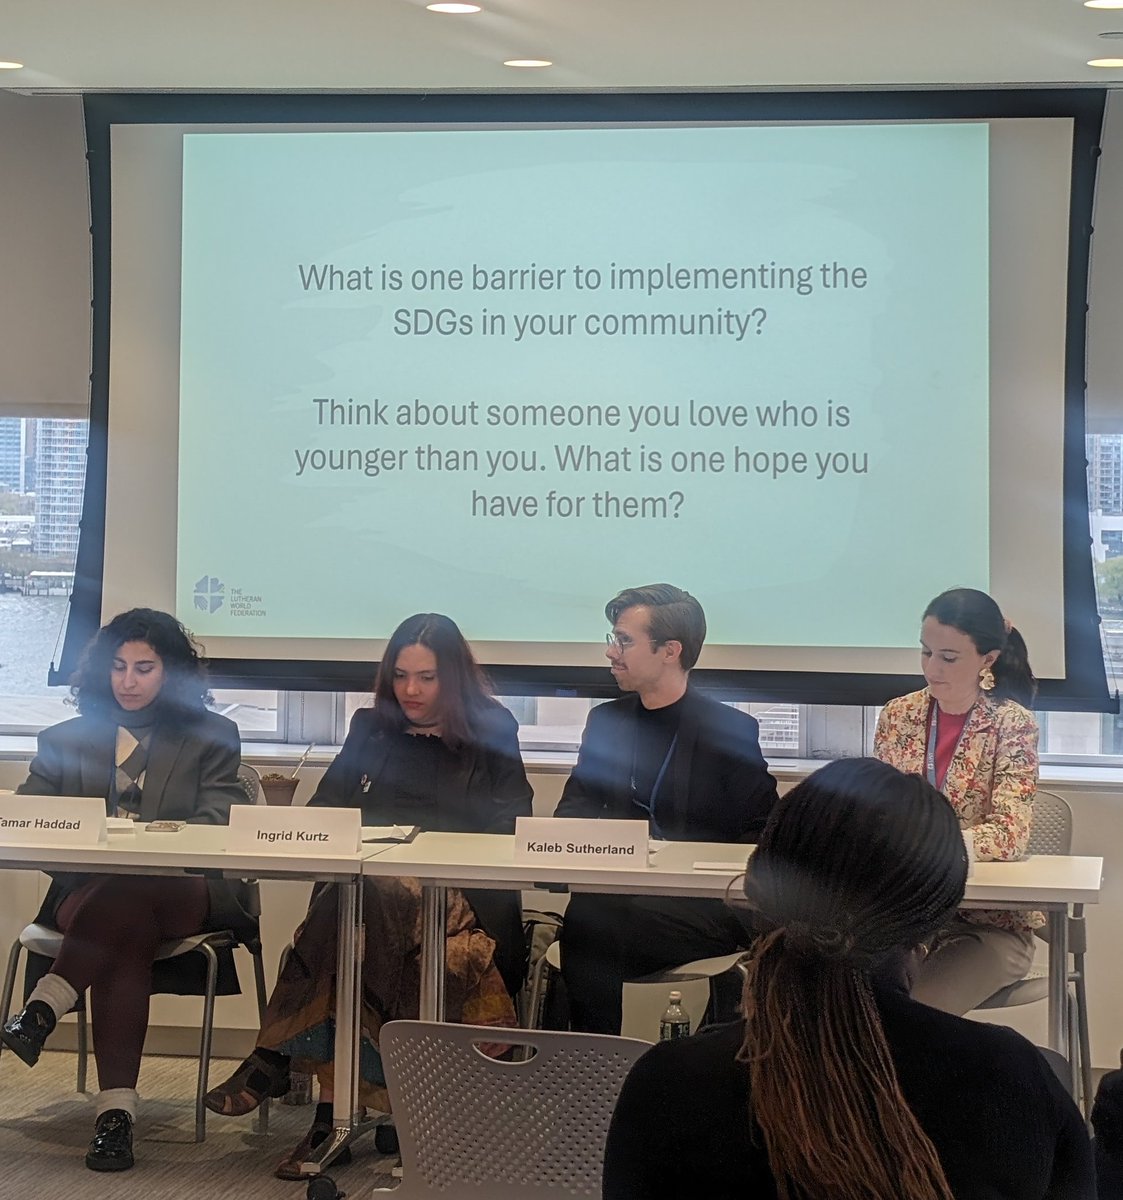 Happening now - Lutheran Youth delegation to #ECOSOC Youth forum event. 

'What is one barrier to implementing the SDGs in your community? ' - Savanna Sullivan, LWF Program Executive For Youth 

@lutheranworld
@LWFAdvocacy @LWFyouth @ELCAadvocacy